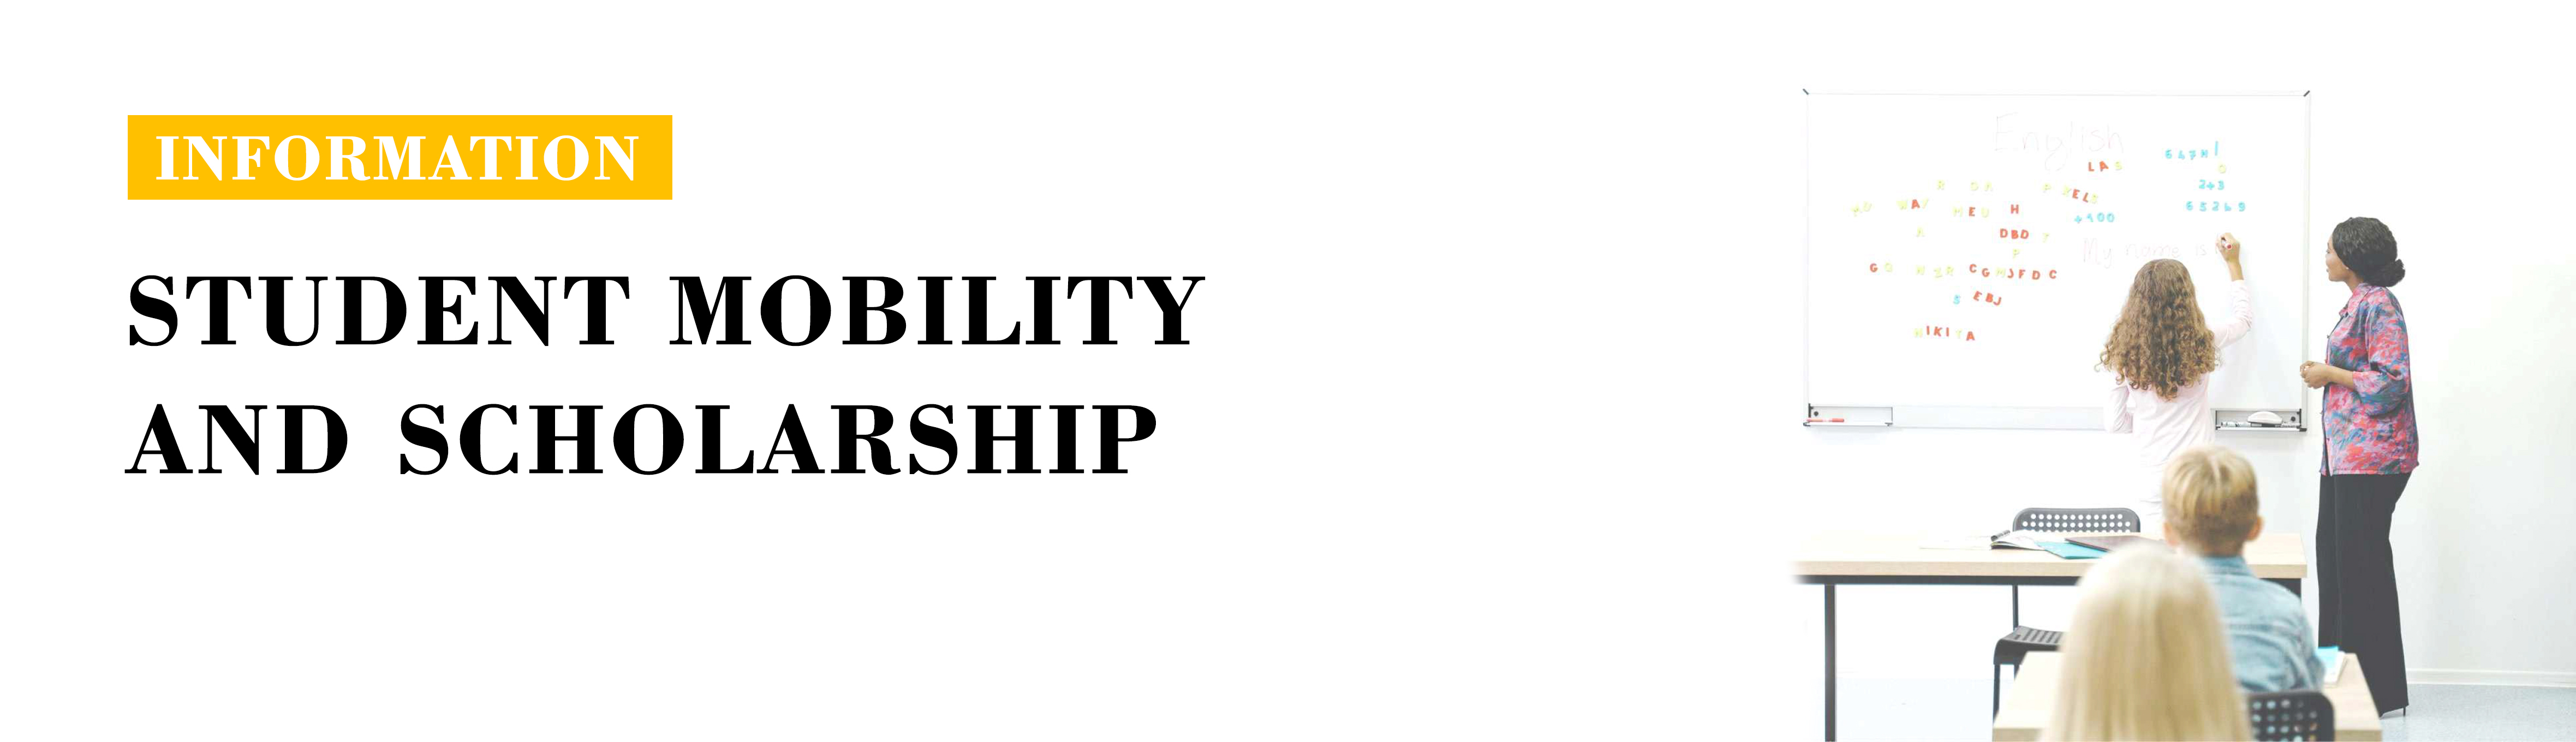 student mobility scholarship